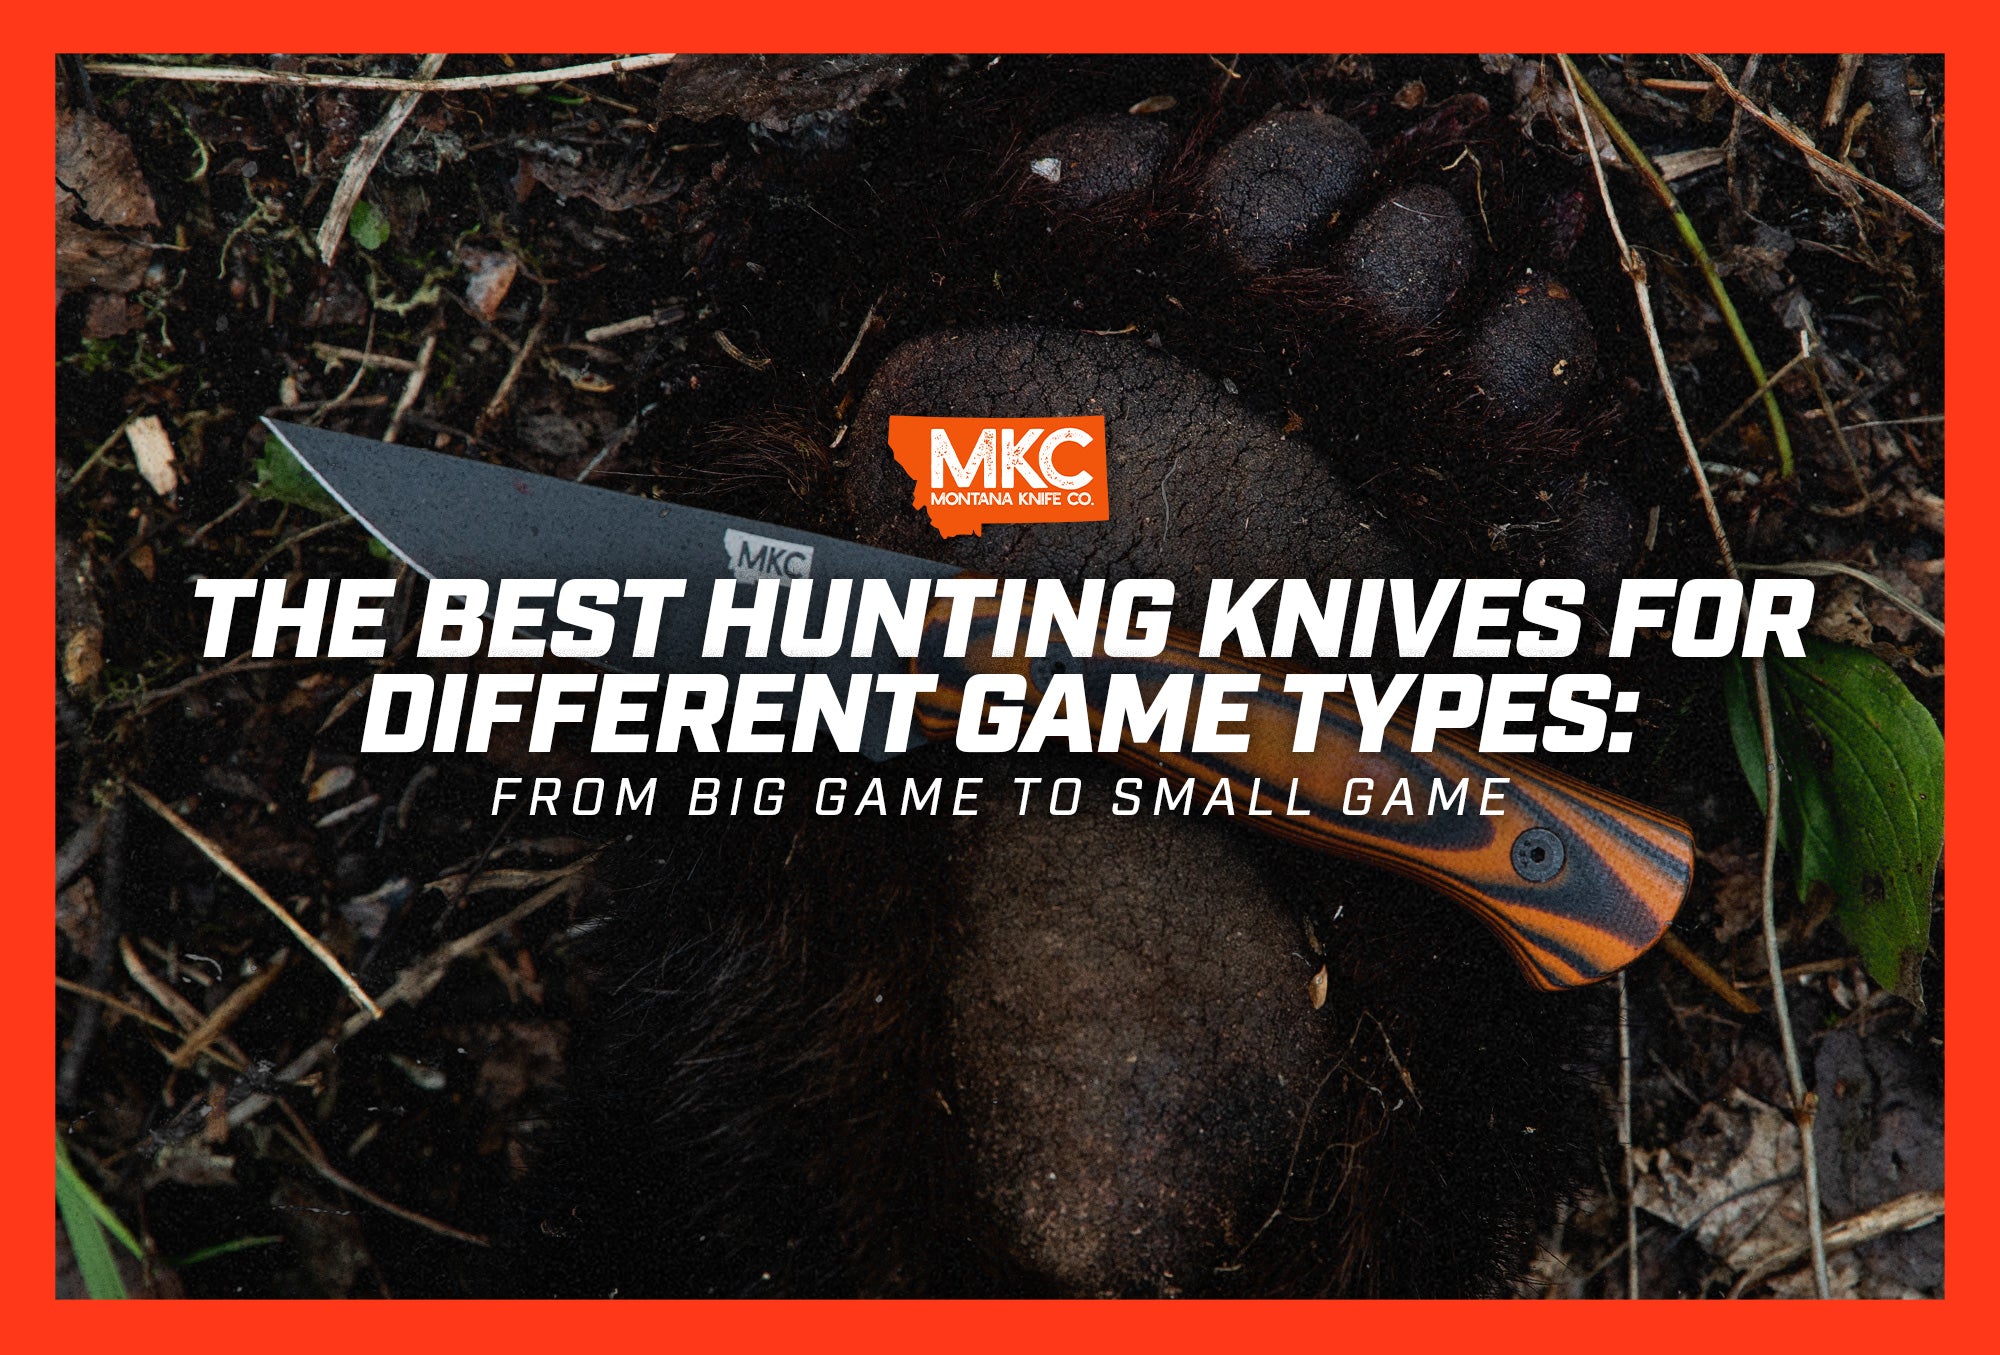 An MKC blade lies on the ground over a large paw print, representing the best hunting knives for different types of game.